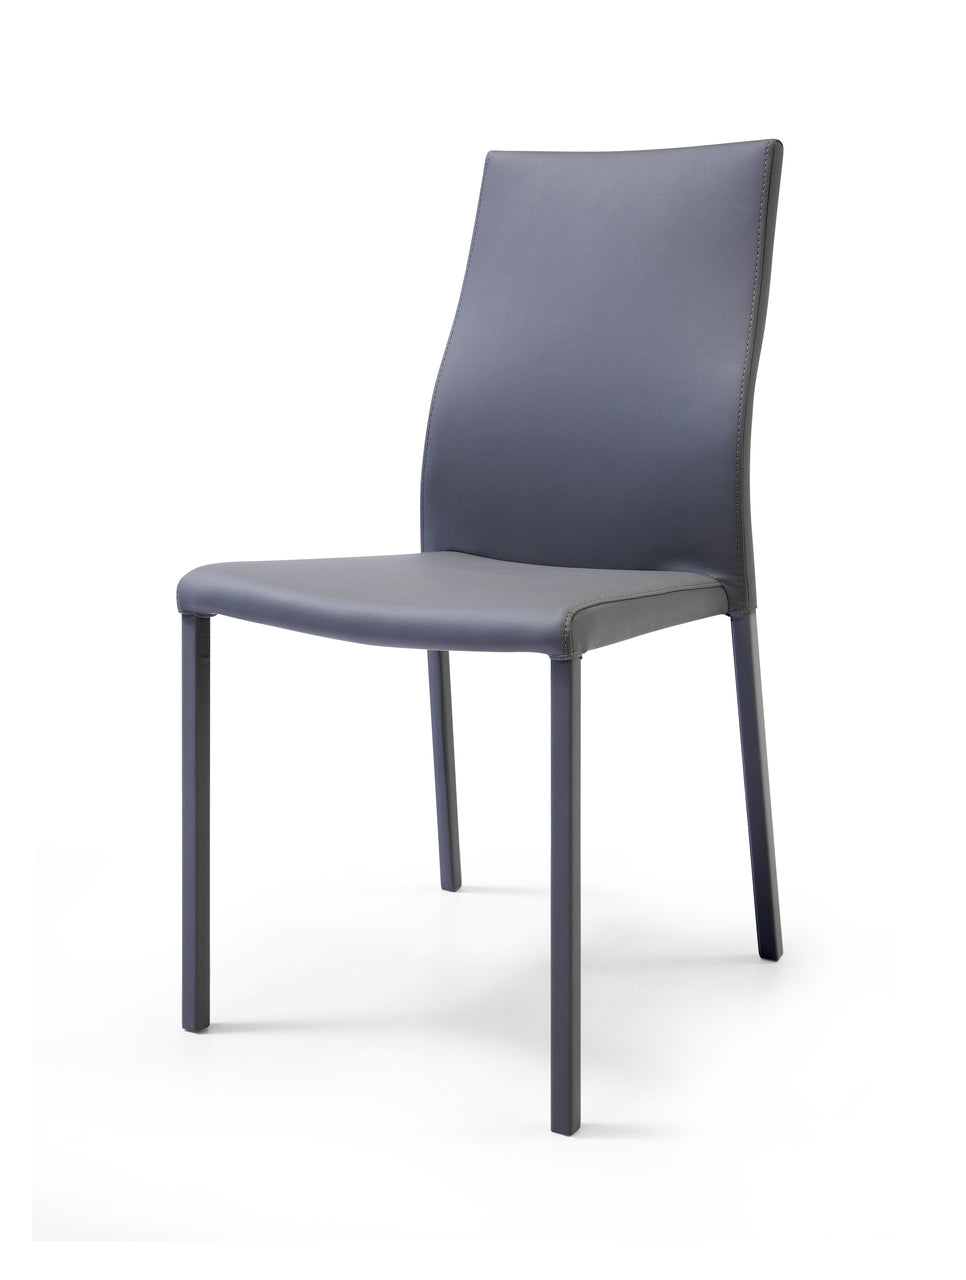 Ellie Dining Chair Grey - Set of 4 by Whiteline